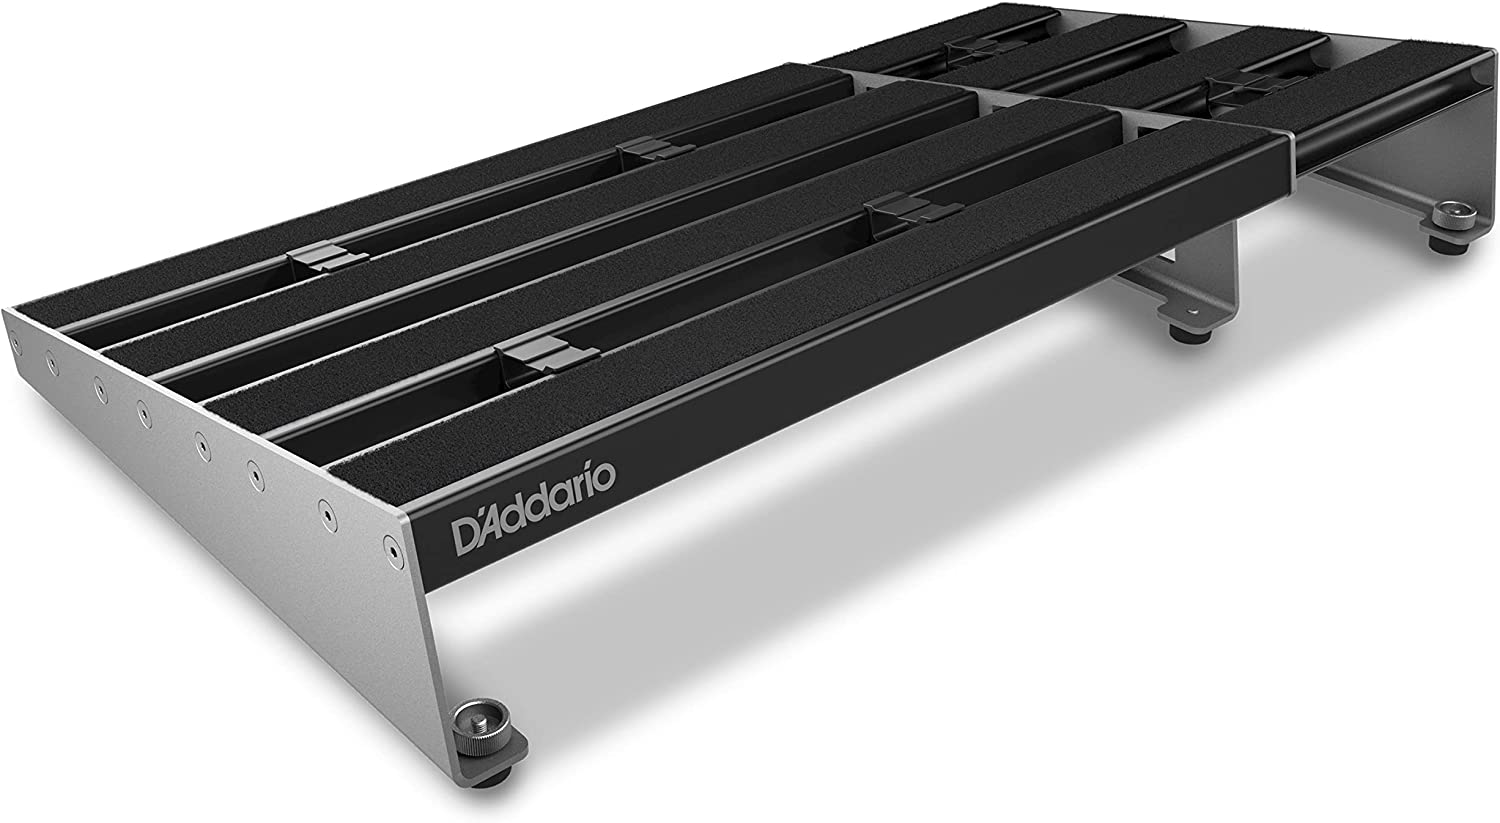 D'Addario XPND Pedal Board on a white background